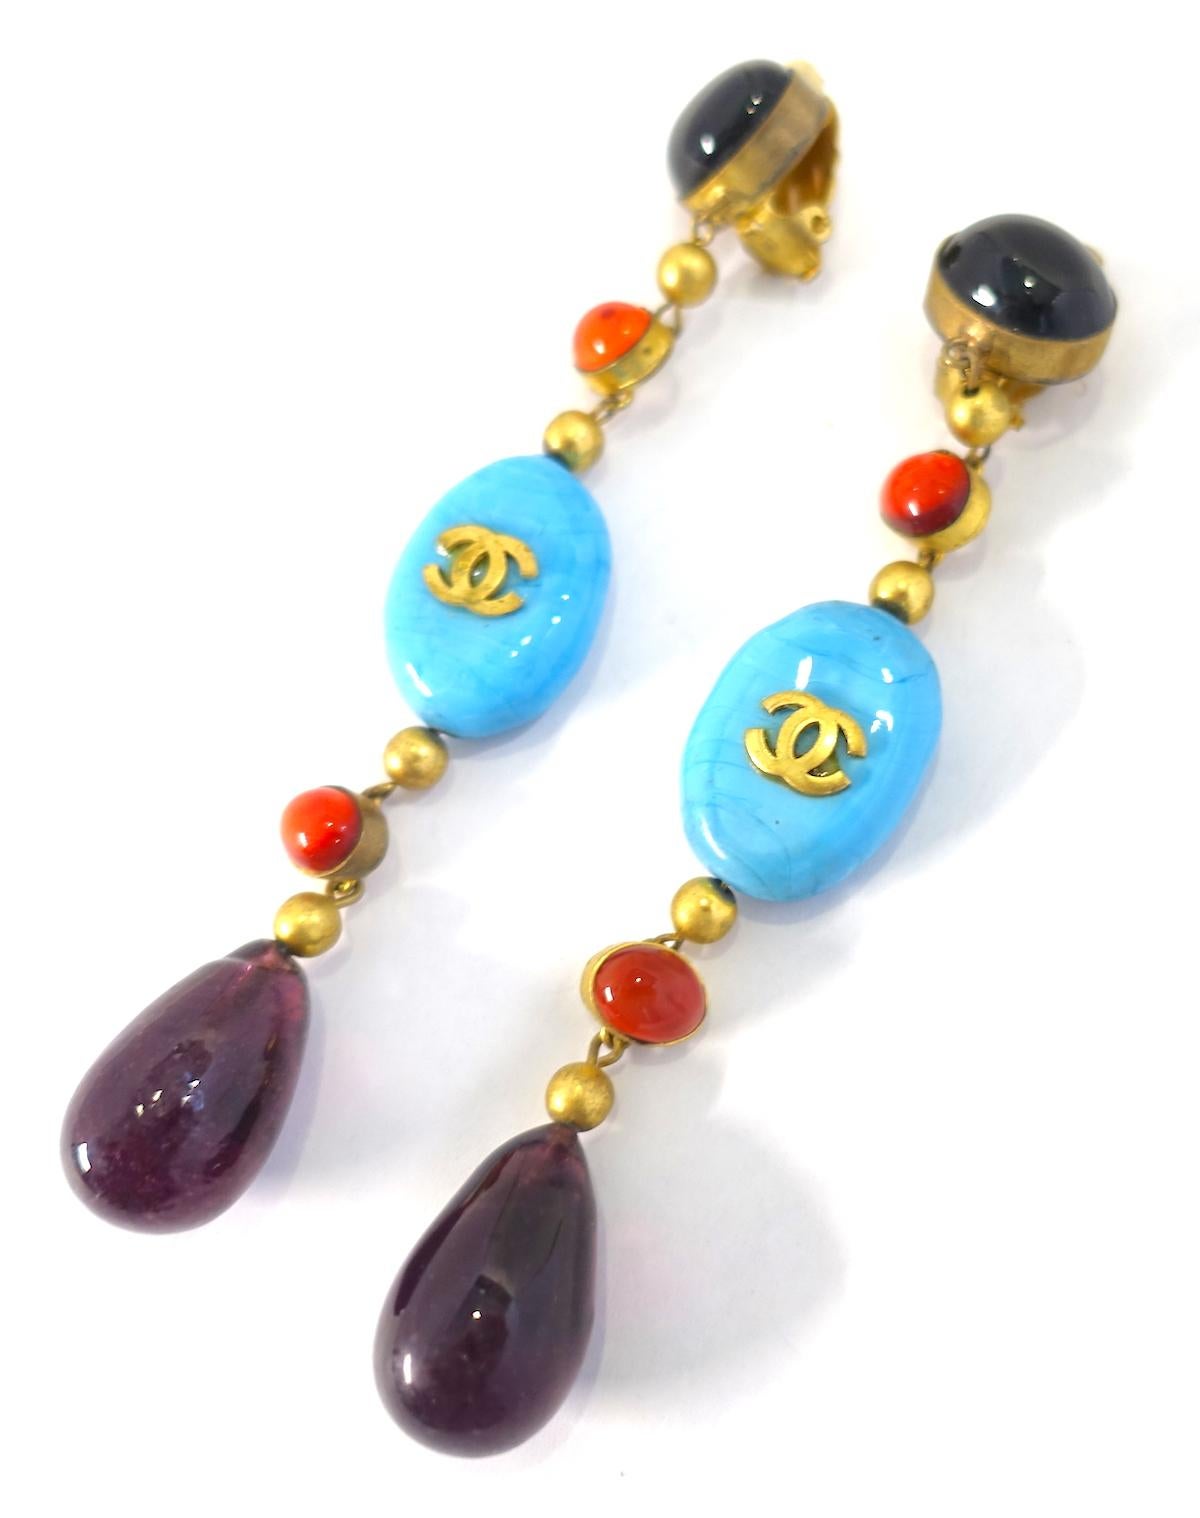 Vintage Signed Chanel Faux Coral & Turquoise Gripoix Glass Dangling Earrings In Good Condition For Sale In New York, NY